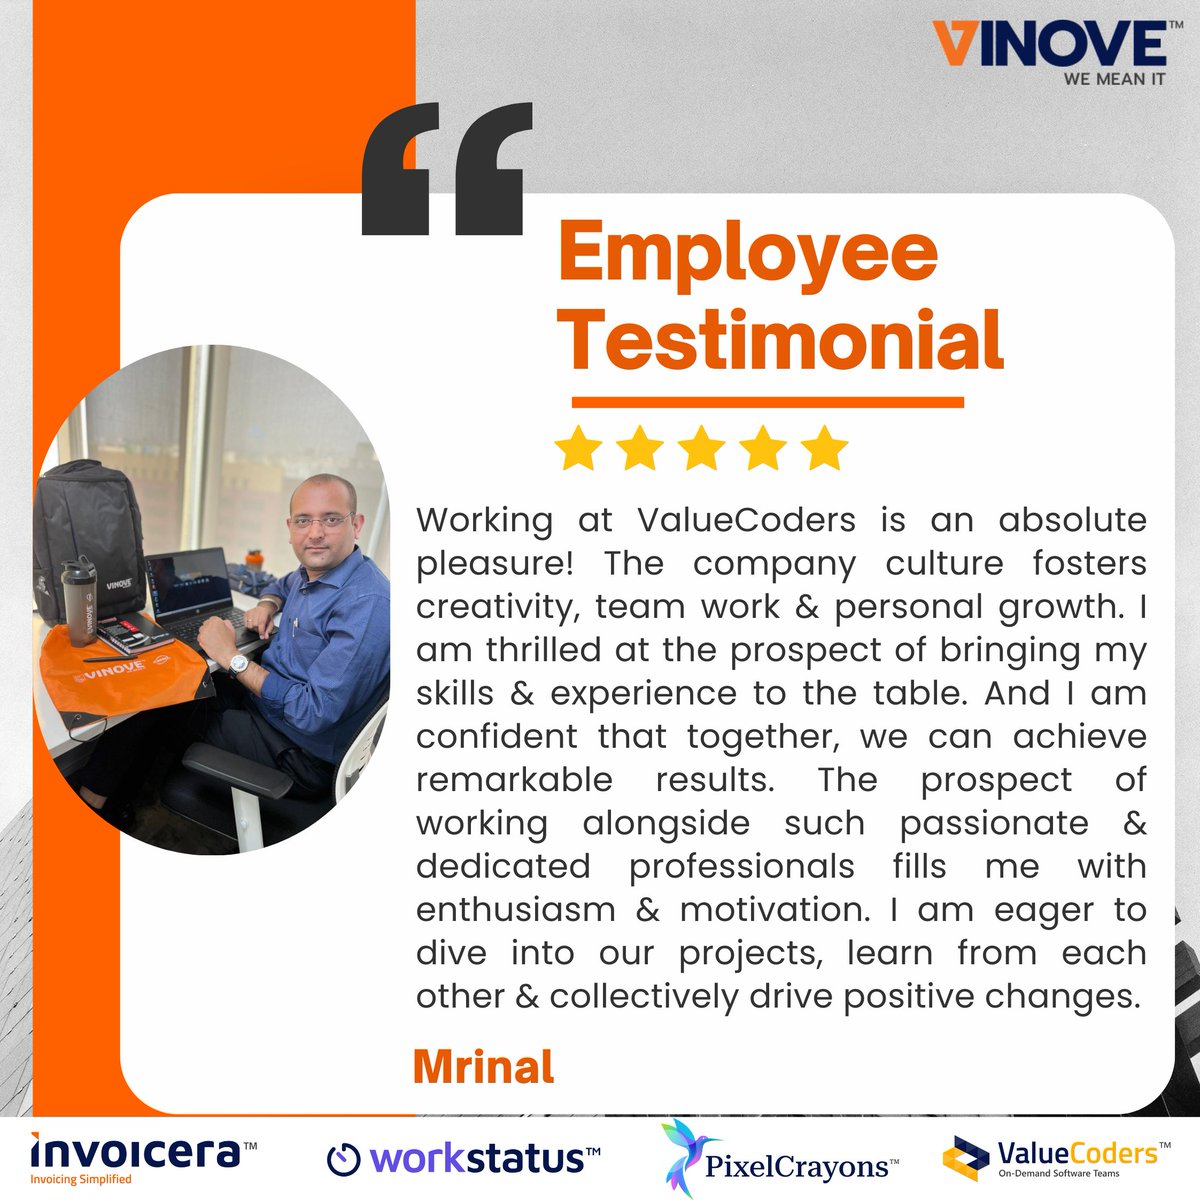 Hear from our newt team member as they share their experiences and insights about joining our incredible team. Discover firsthand what makes us a great place to work! #NewBeginnings #EmployeeTestimonial #MyVinove